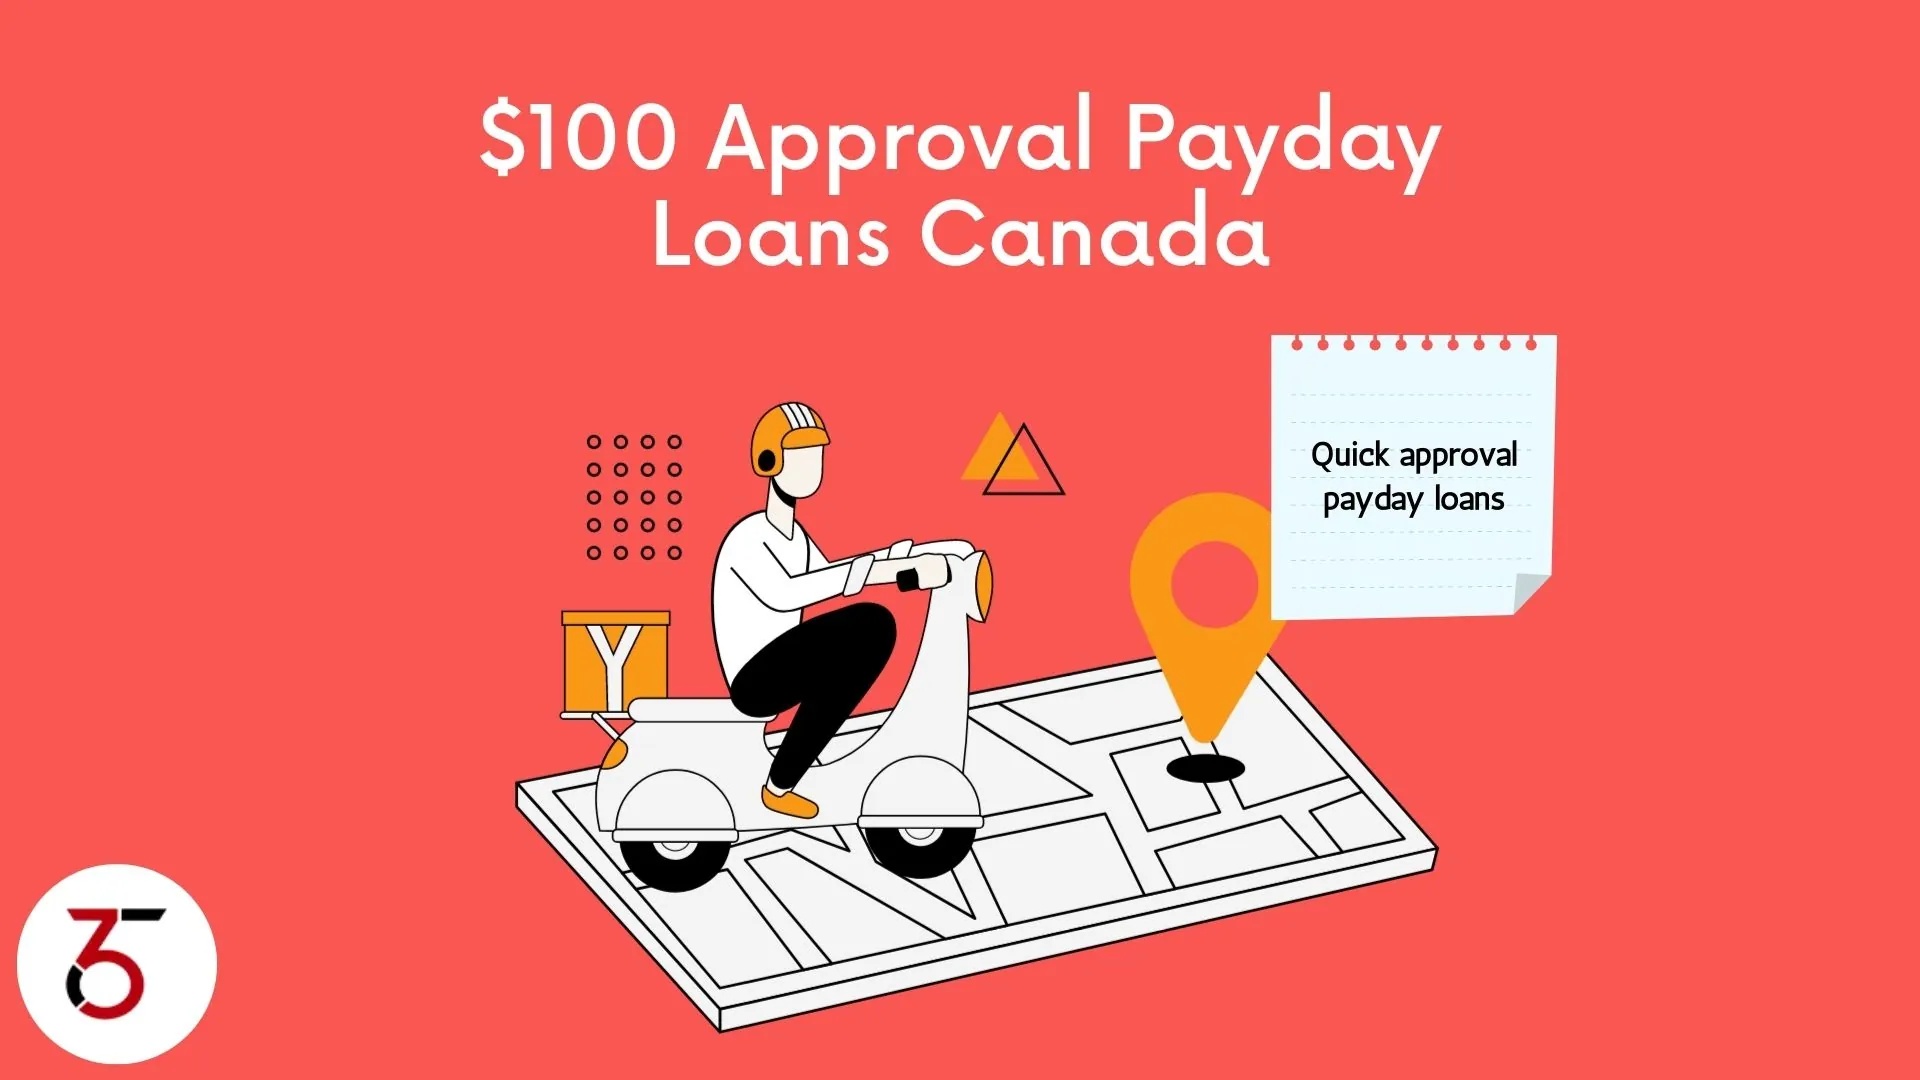 Get $100 Approval Payday Loans Canada with Ease